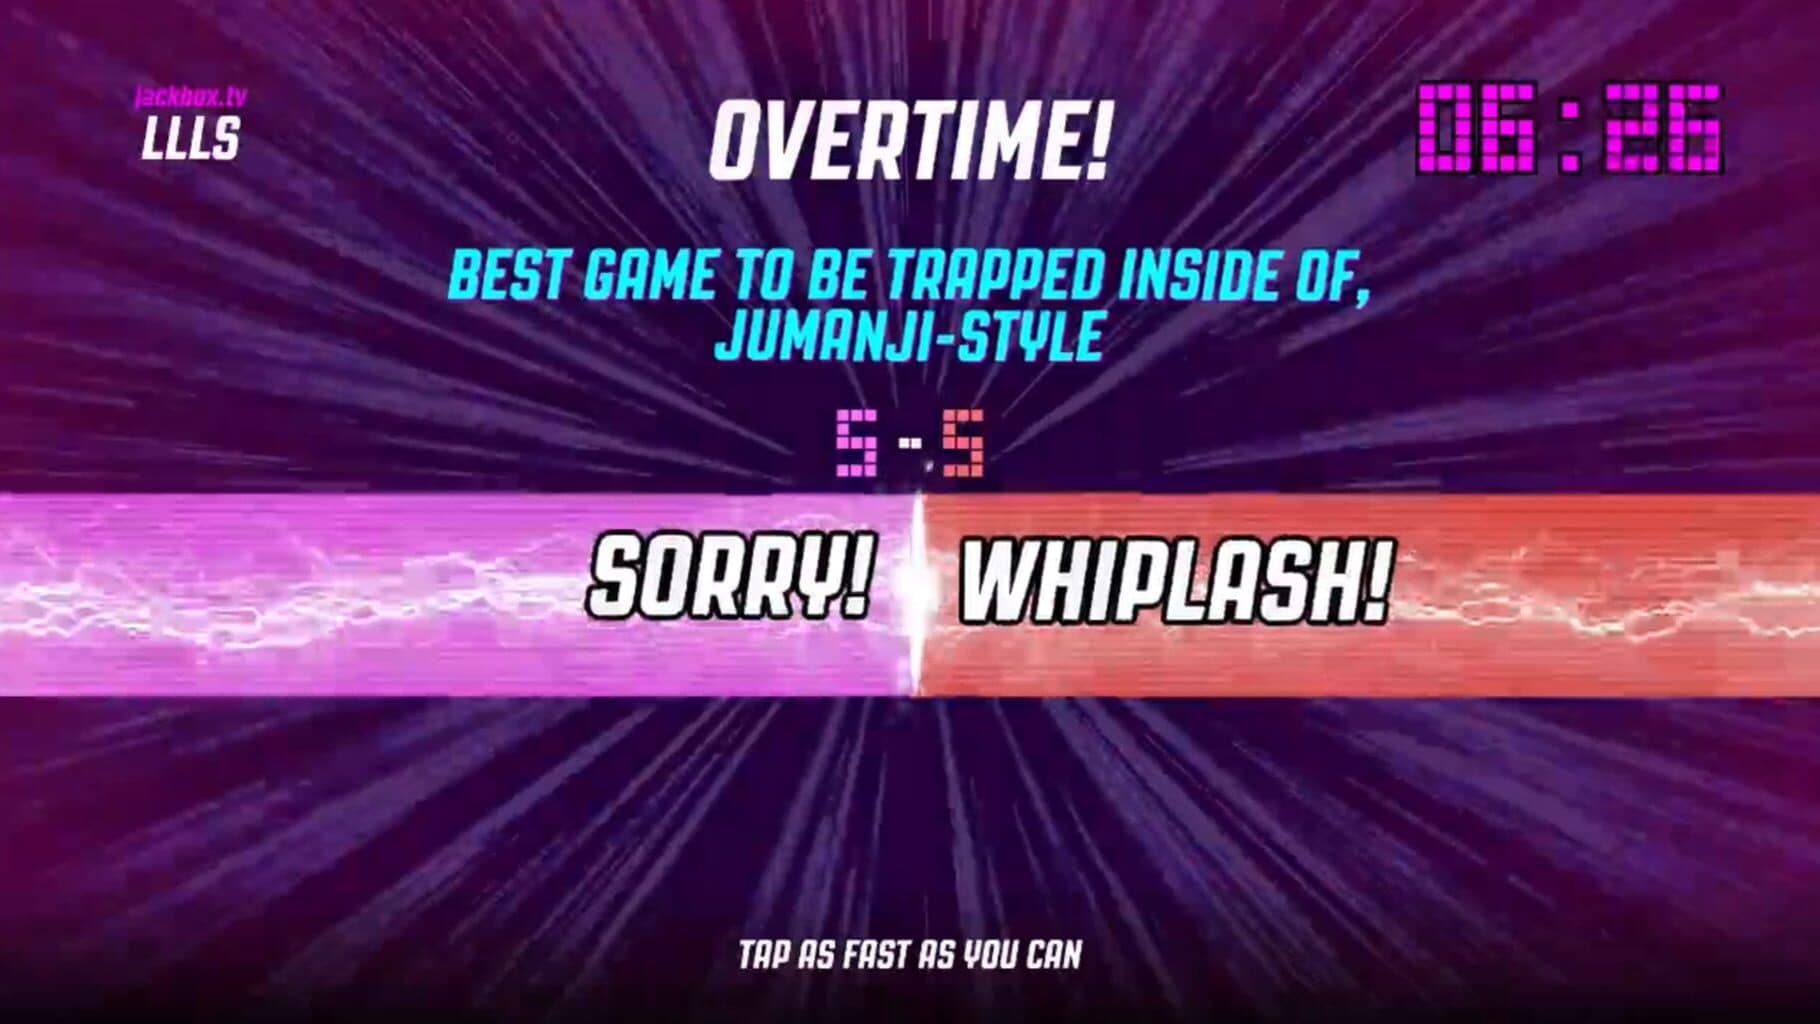 The Jackbox Party Quadpack Image